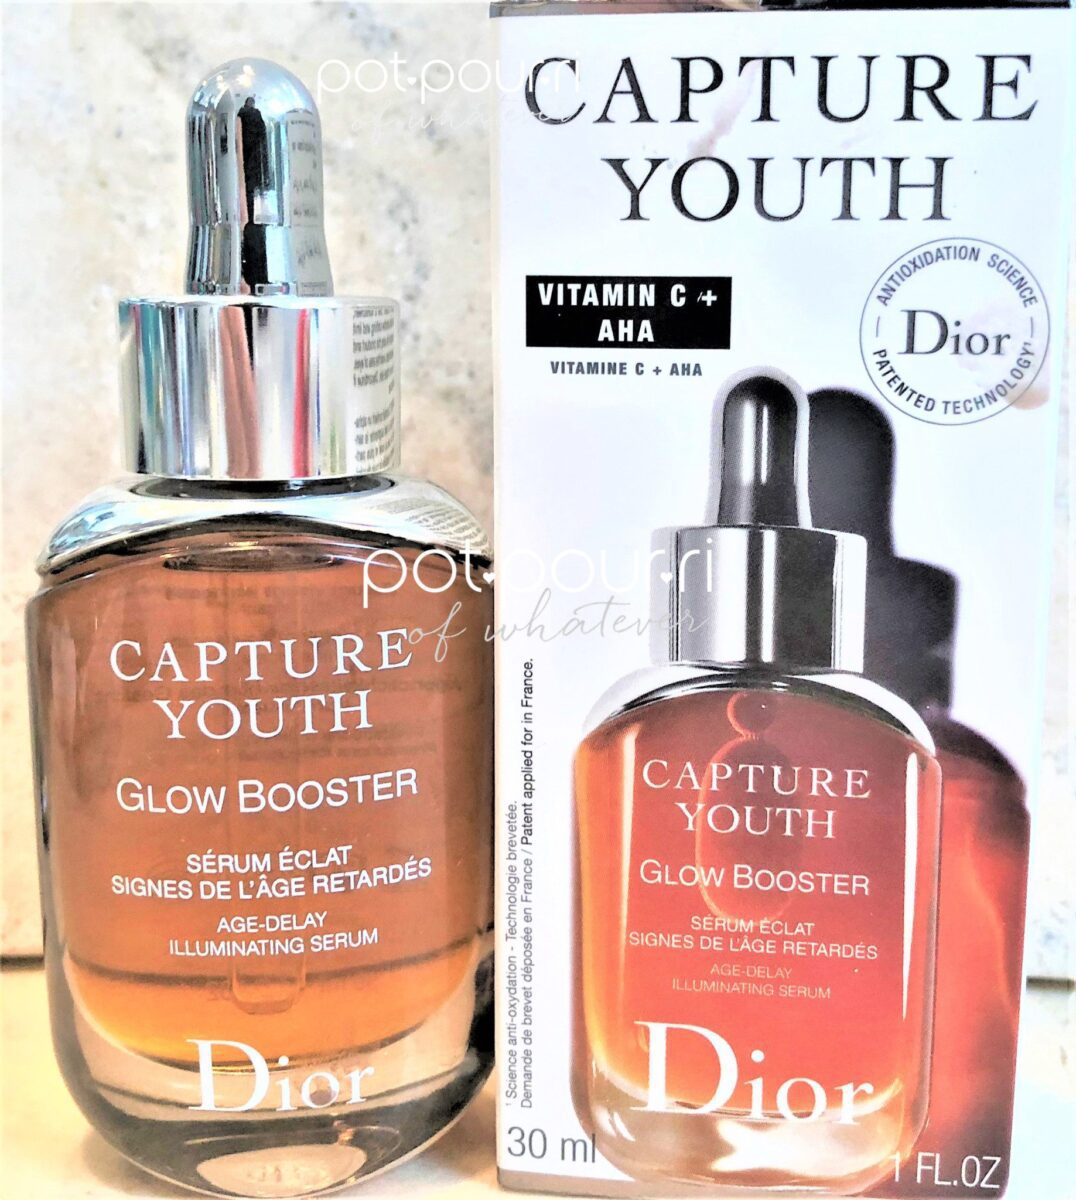 dior capture youth glow booster review 